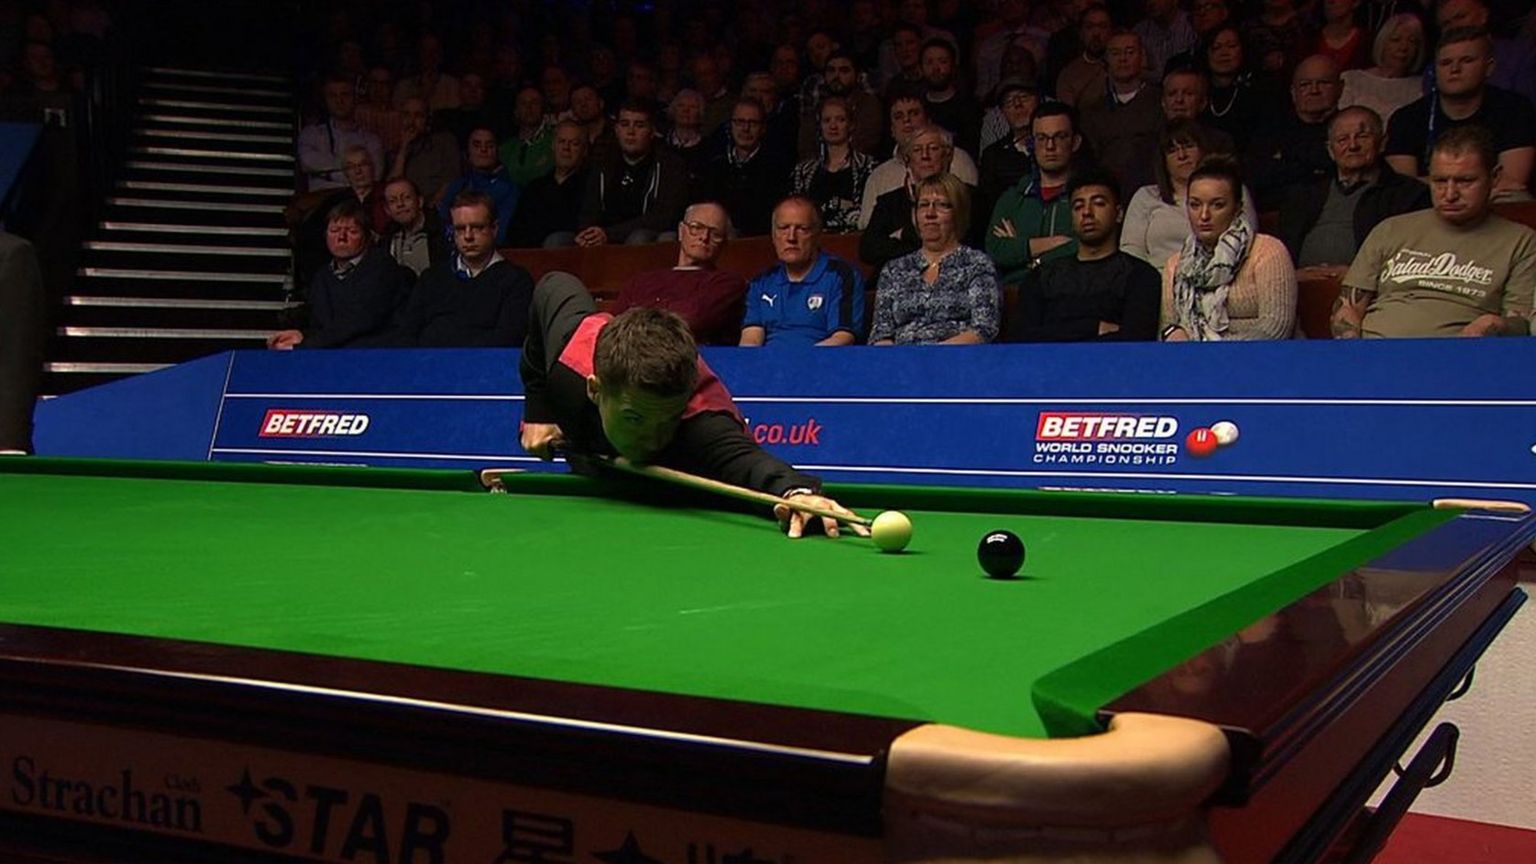 Michael Holt makes the highest break of the tournament with a 140 as he takes on Australian Neil Robertson.